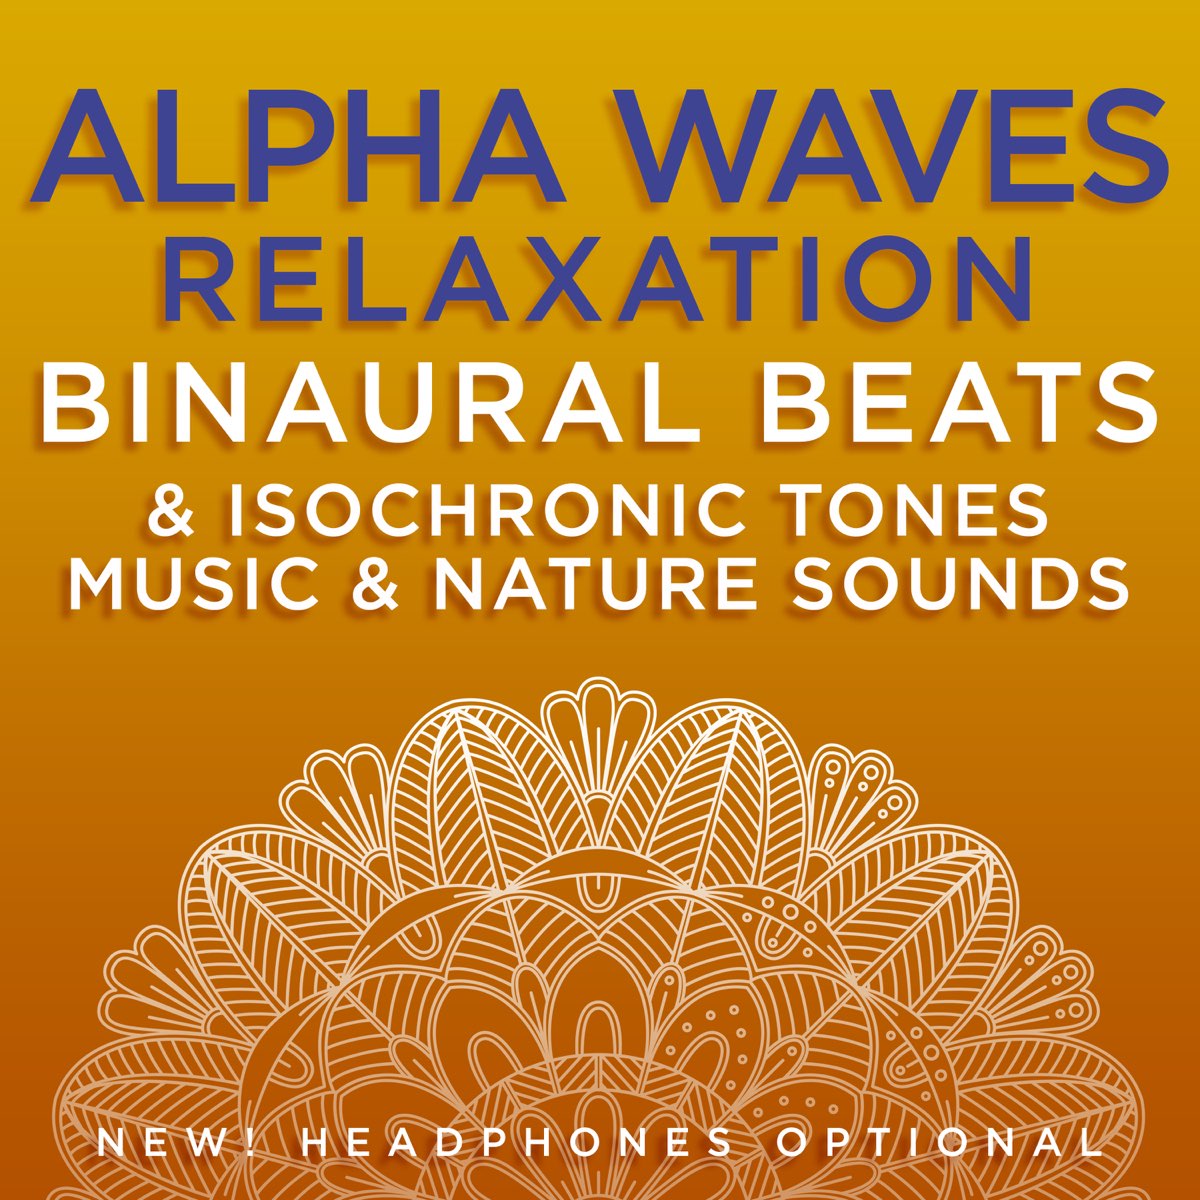 Alpha Waves Relaxation Binaural Beats & Isochronic Tones Music & Nature  Sounds (feat. David & Steve Gordon) by Binaural Beats Research & David &  Steve Gordon on Apple Music